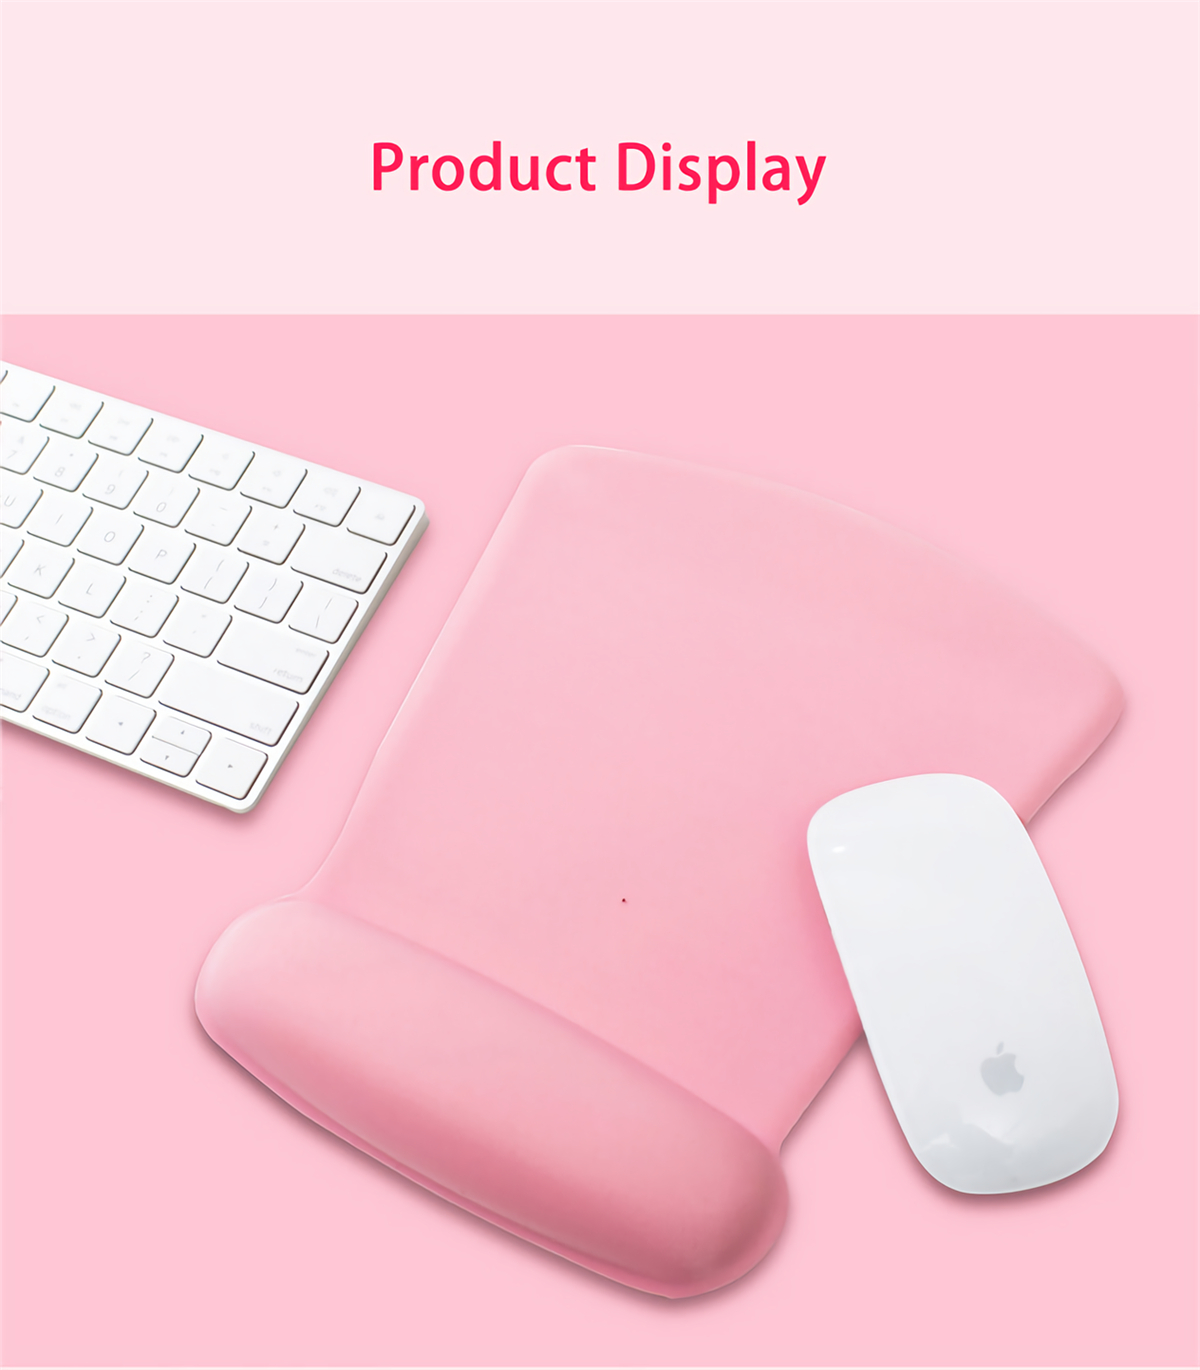 MONTIAN MF-02 Slow Rebound Mouse Pad Fan-shaped Memory Foam Soft Hand Rest Wrist Pad Anti-skid Wrist Support for Home Office